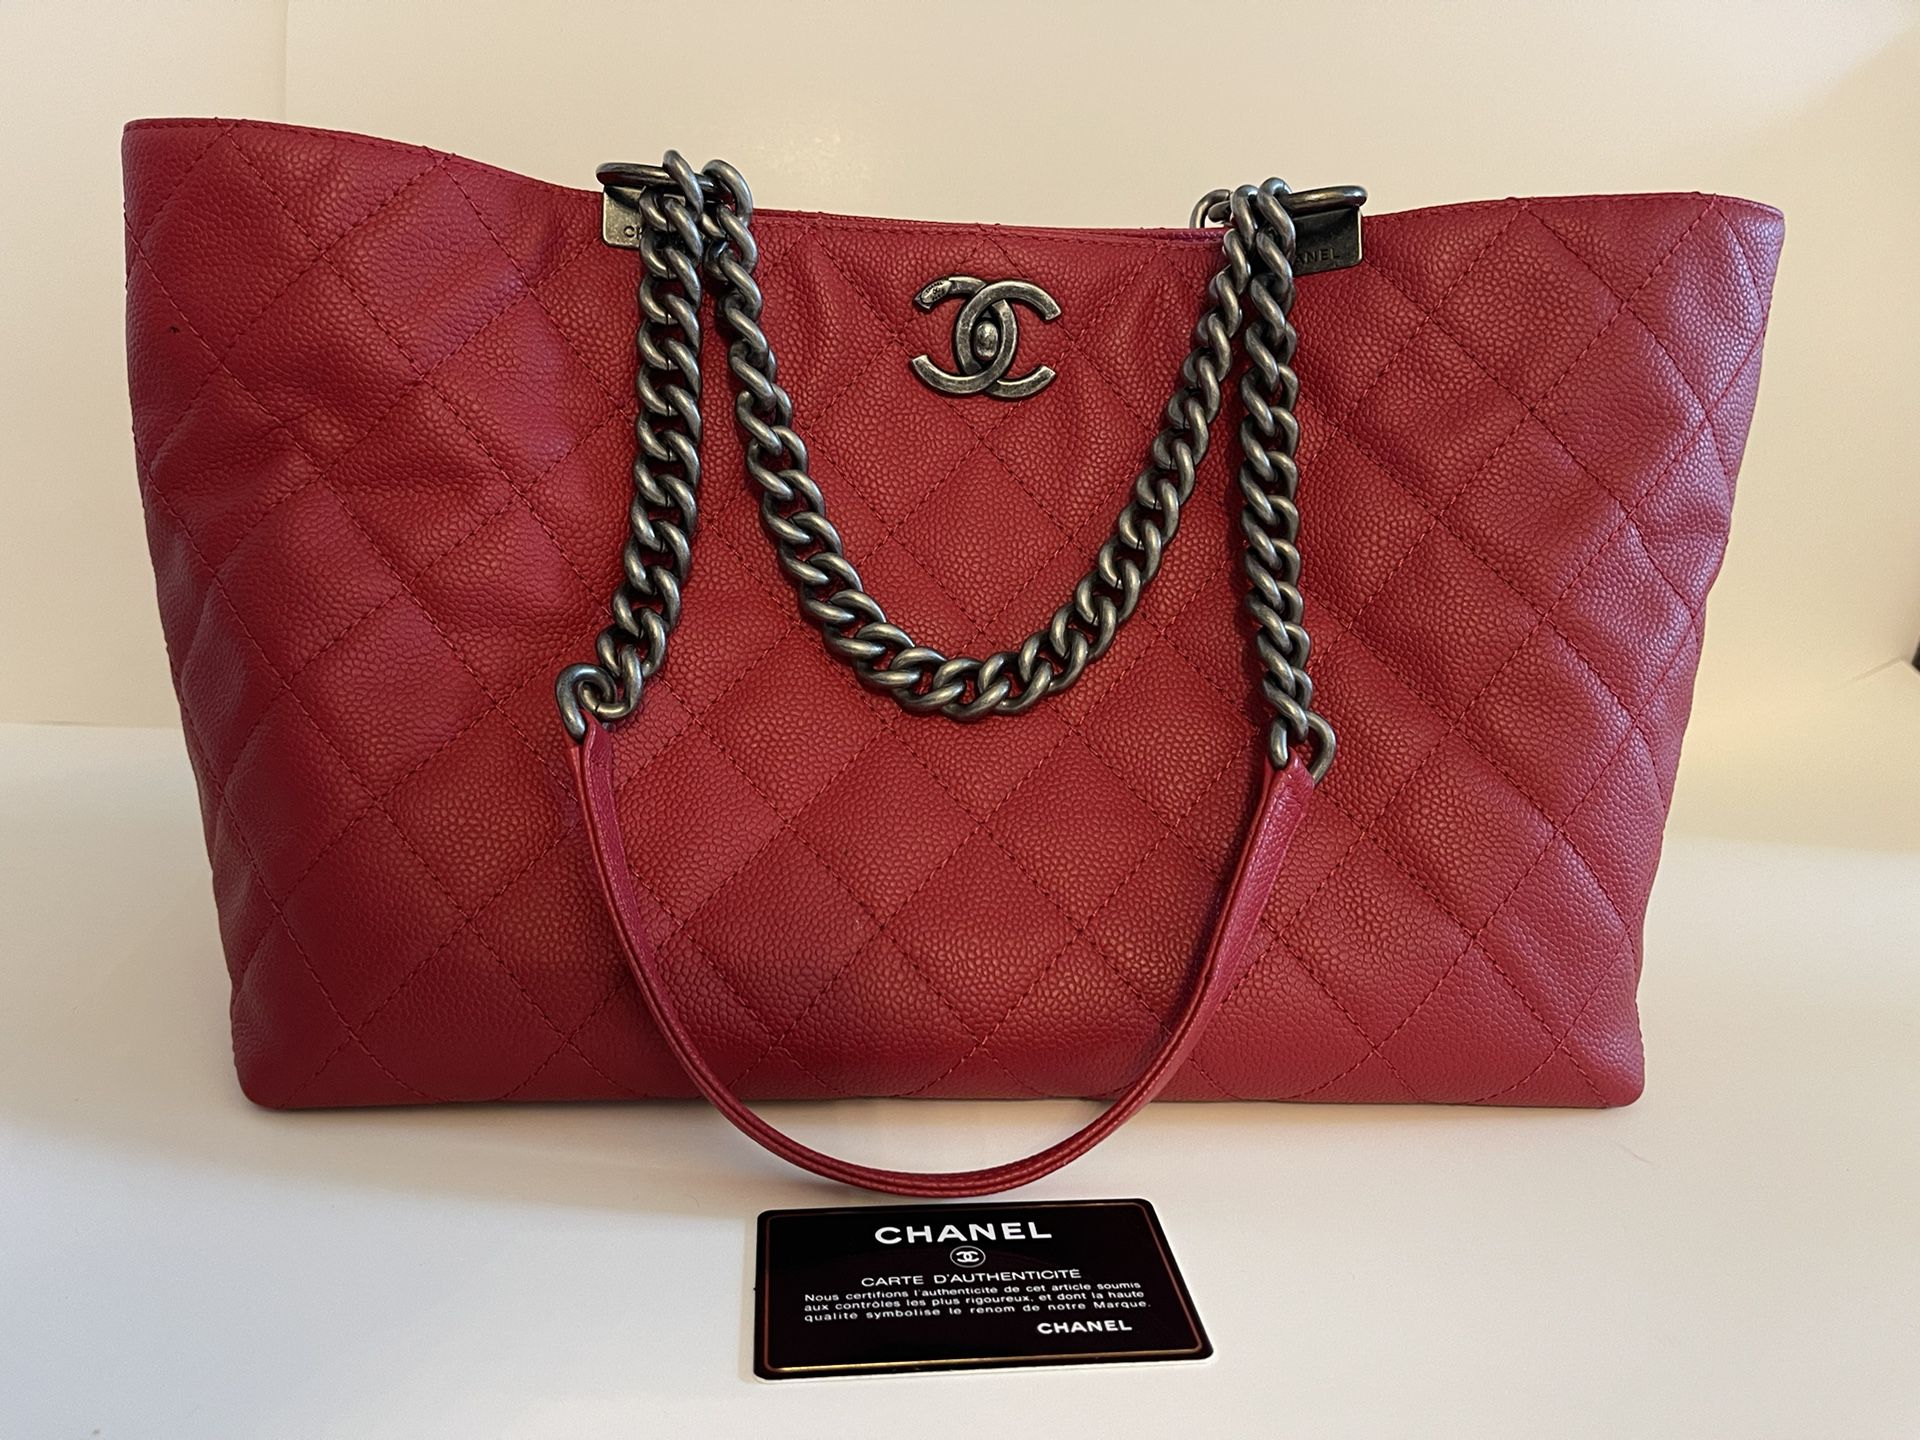 Chanel Tote Bag in Chains Strawberry  $1100